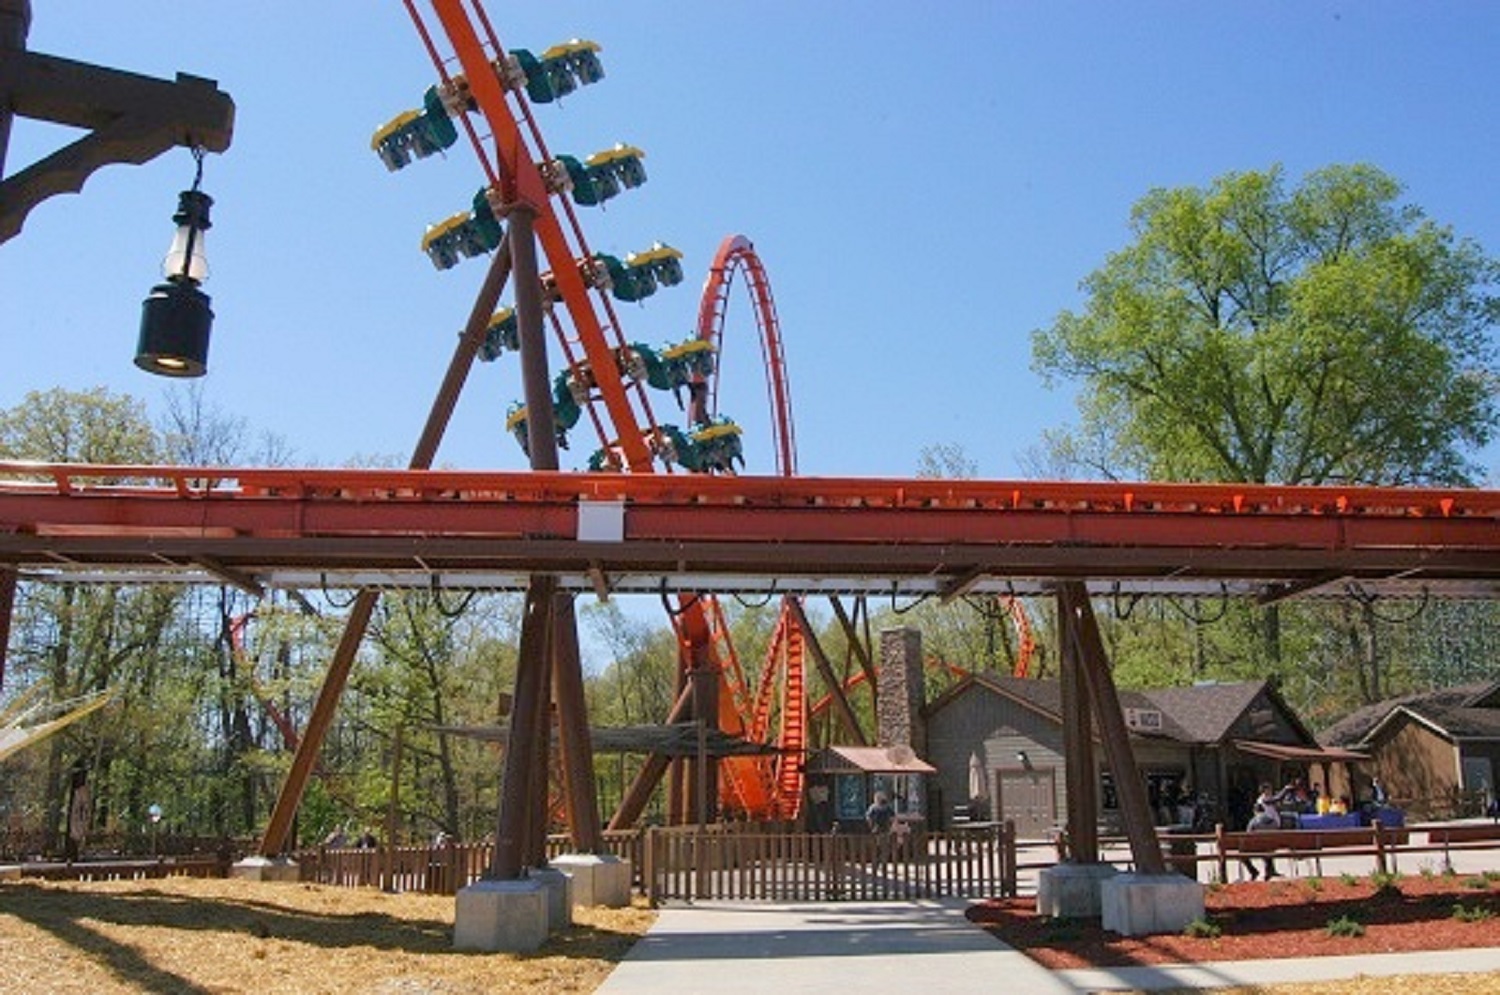 The Business of Building Roller Coasters - Priceonomics